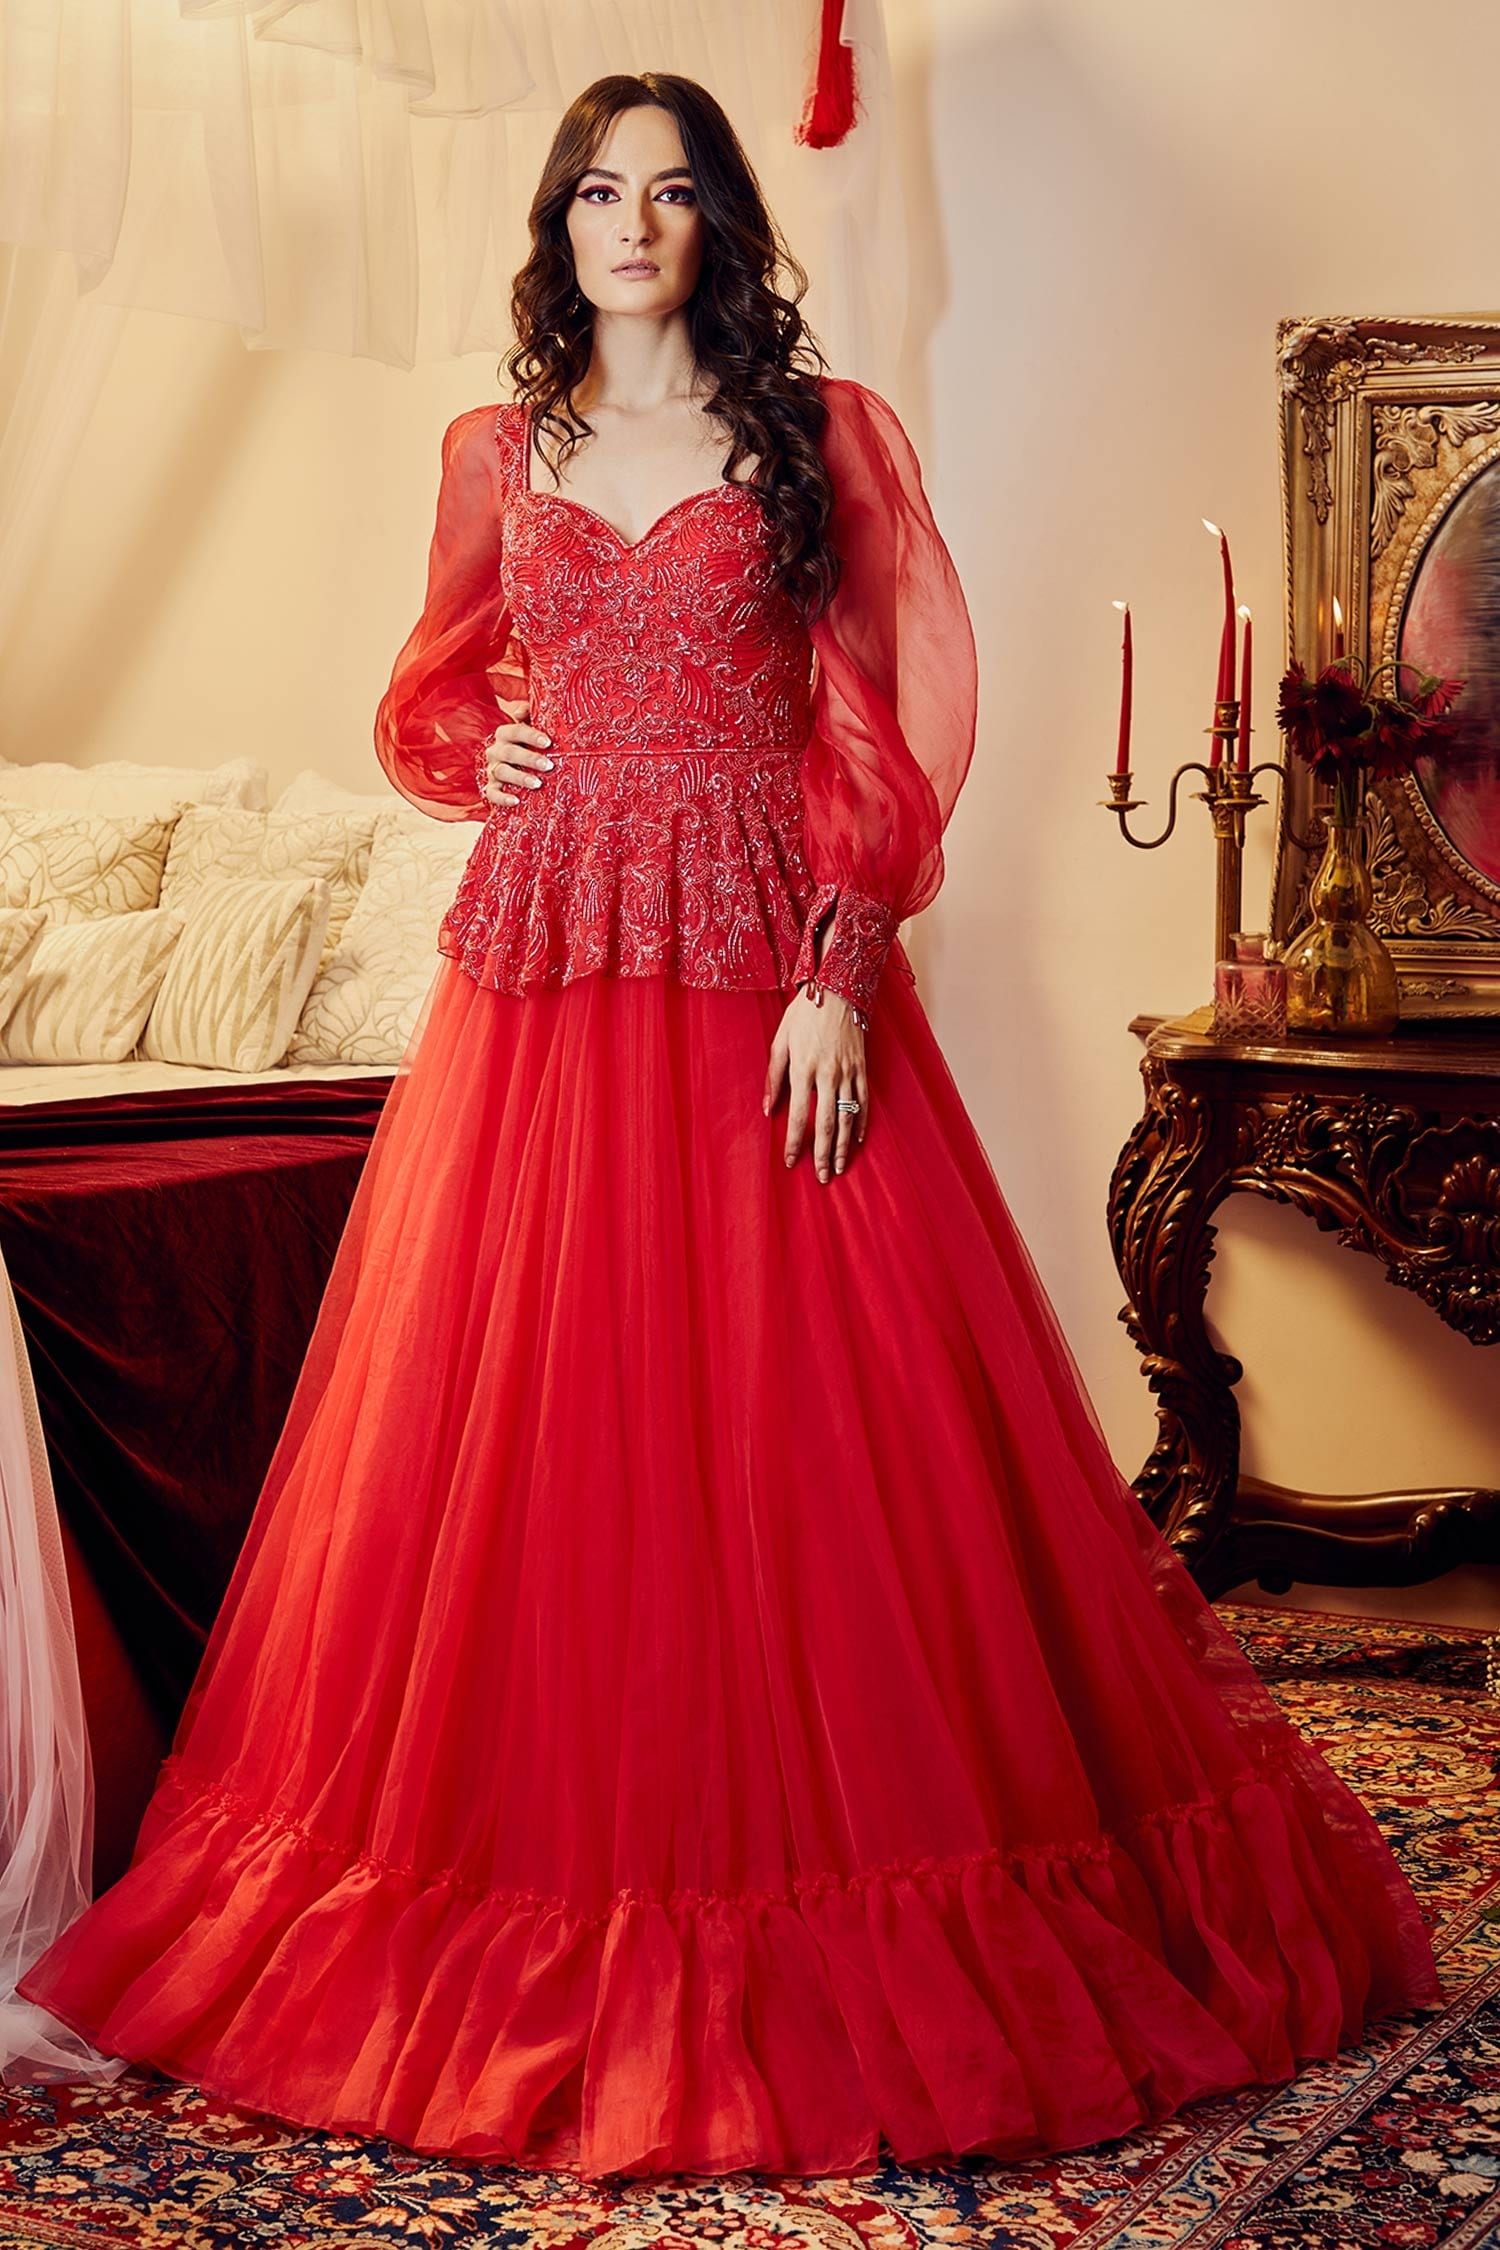 Red Wedding Dresses: 18 Lovely Options For Brides | Red bridal dress, Red  wedding gowns, Red wedding